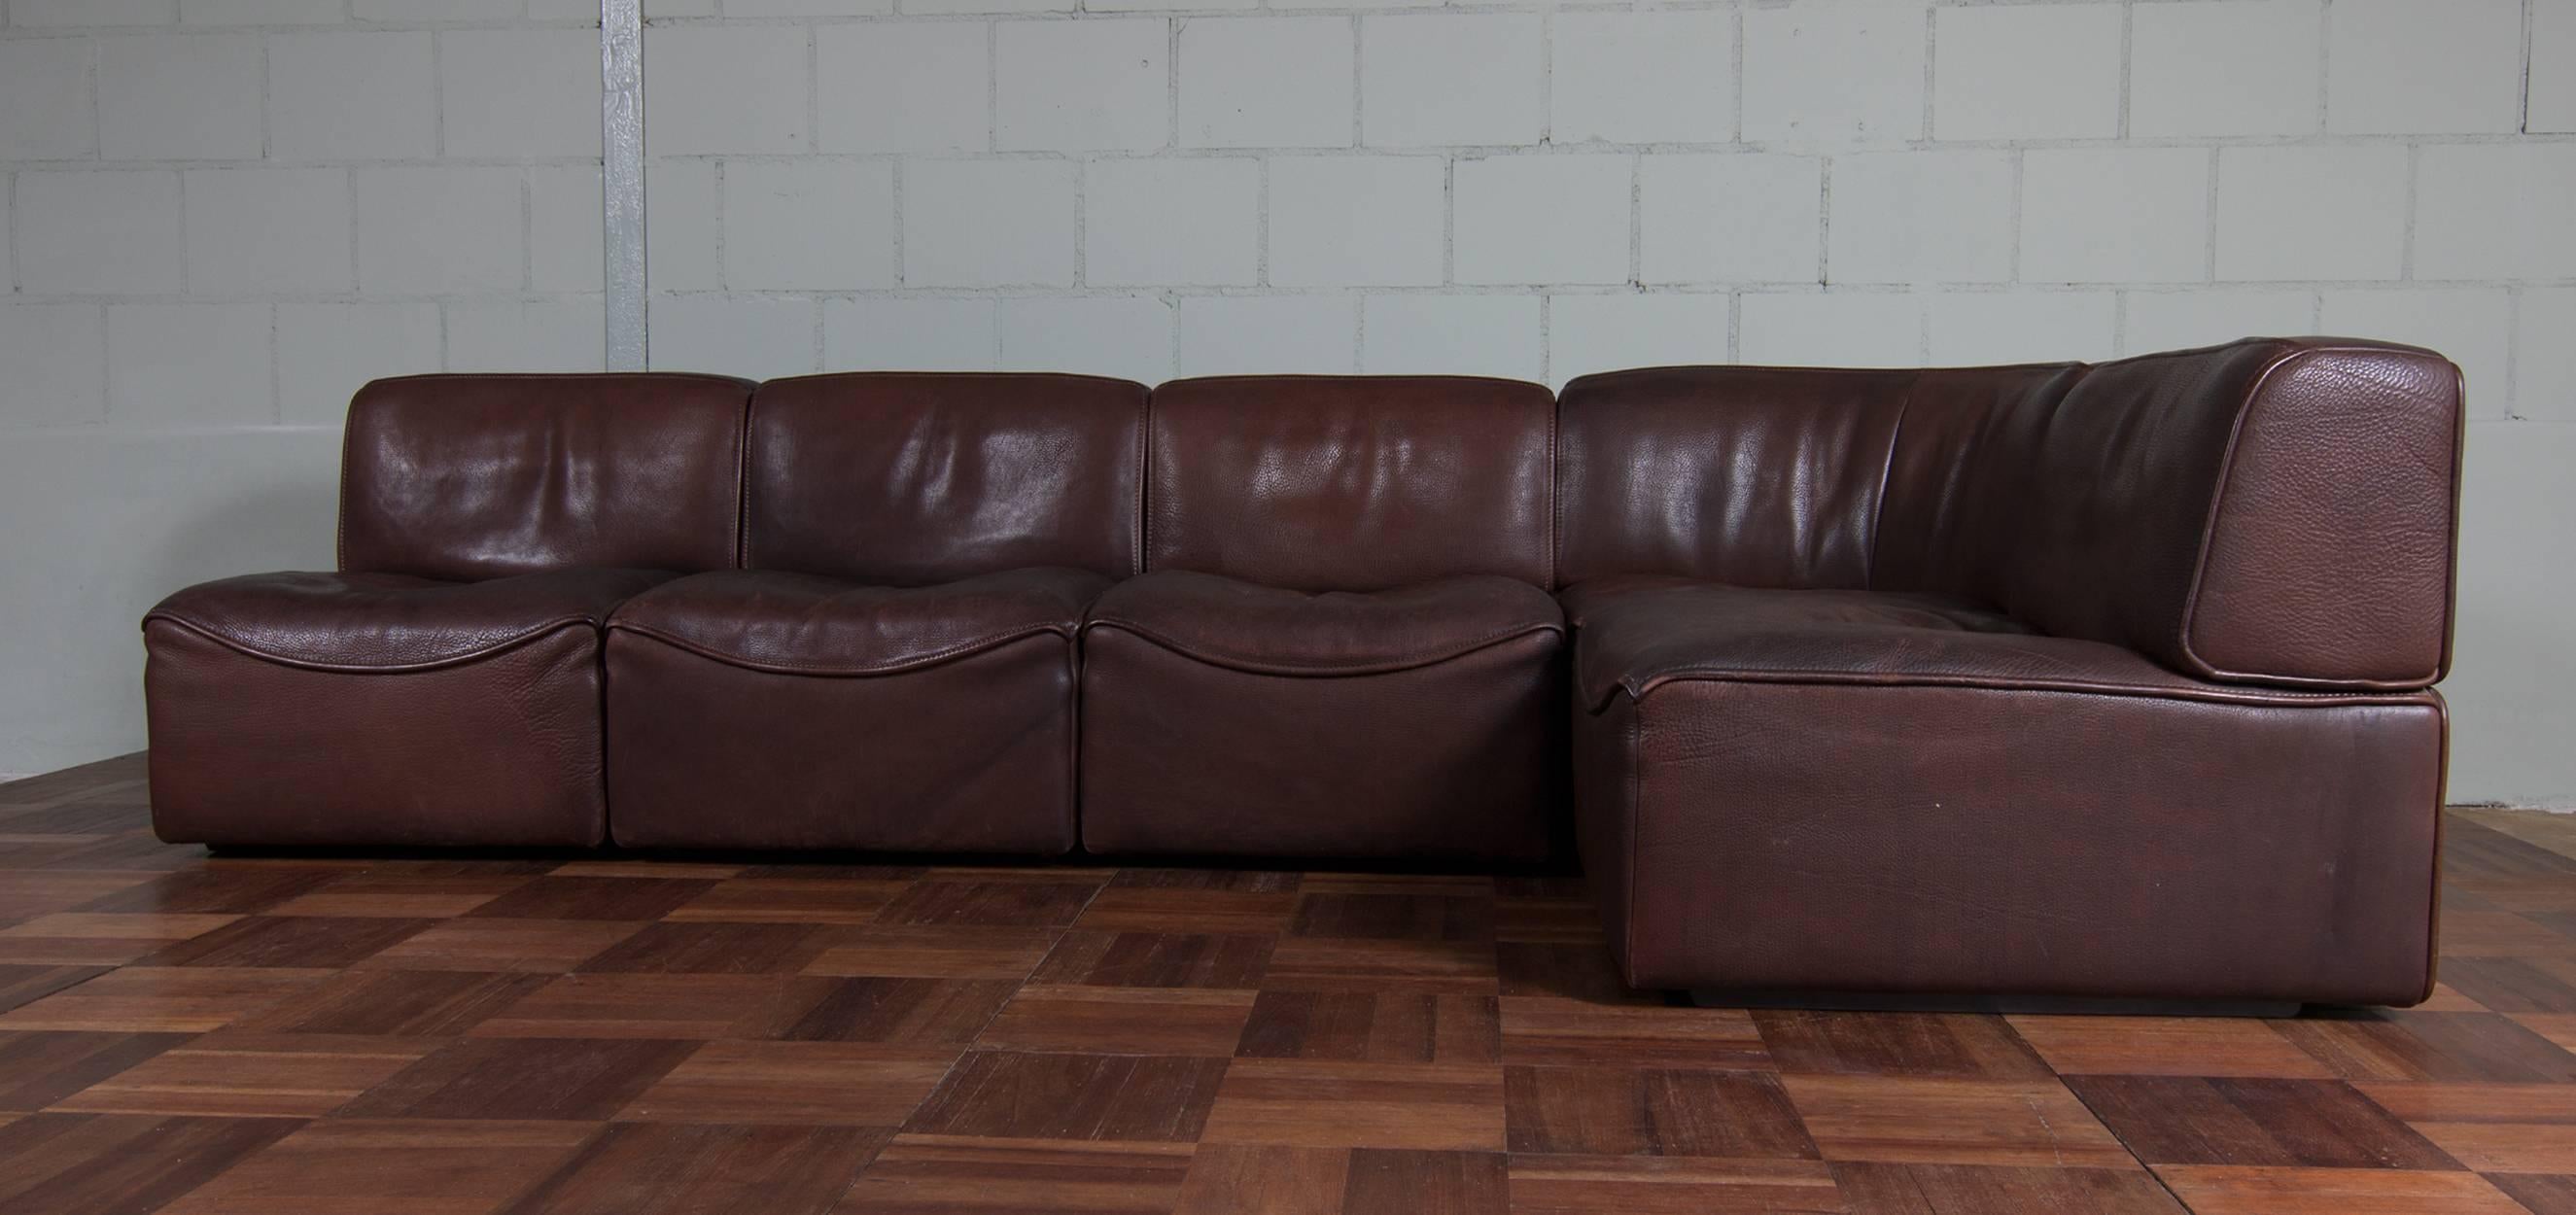 De Sede DS 15 modular neck leather sofa with five elements. Produced and designed by the Swiss company De Sede in the 1970s. The sofa has many set-up possibilities. You can make a corner sofa, two separate sofas or an easy chair separately, with